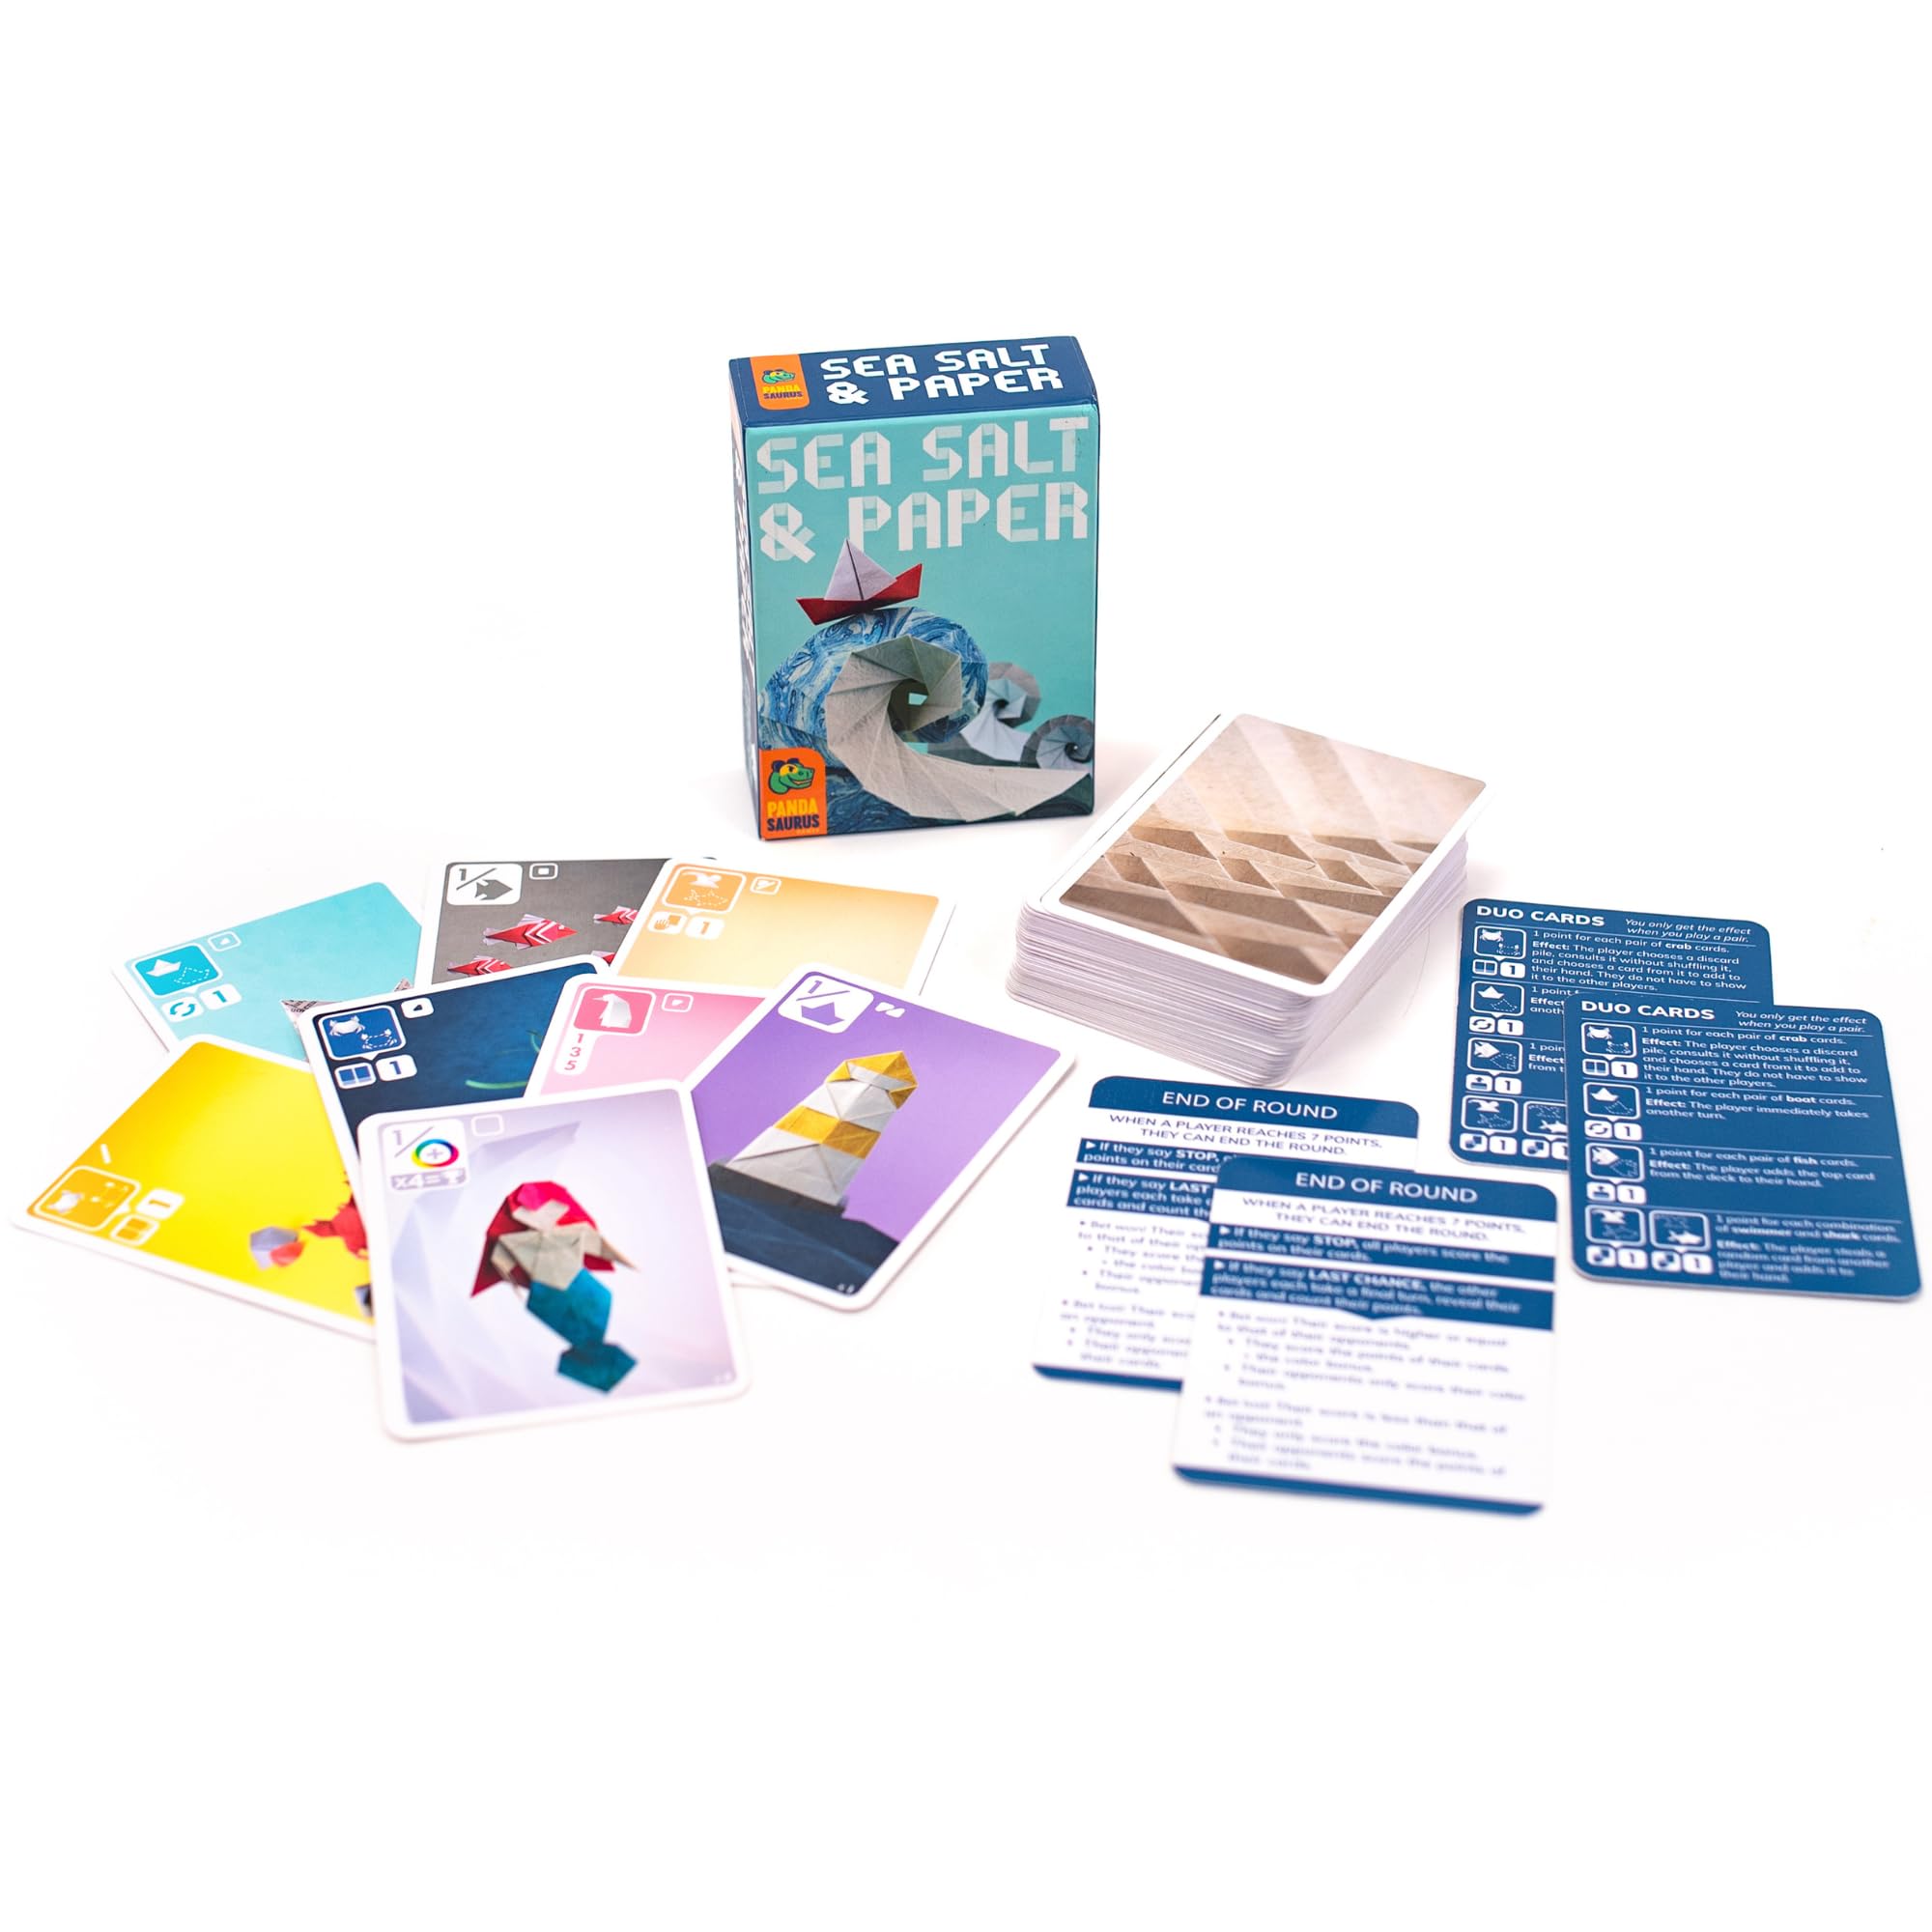 Pandasaurus Games Sea Salt and Paper Card Game - Ocean-Themed Strategy Game, Fast-Paced and Tactical, Fun Family Game for Kids and Adults, Ages 8+, 2-4 Players, 30-45 Minute Playtime, Made